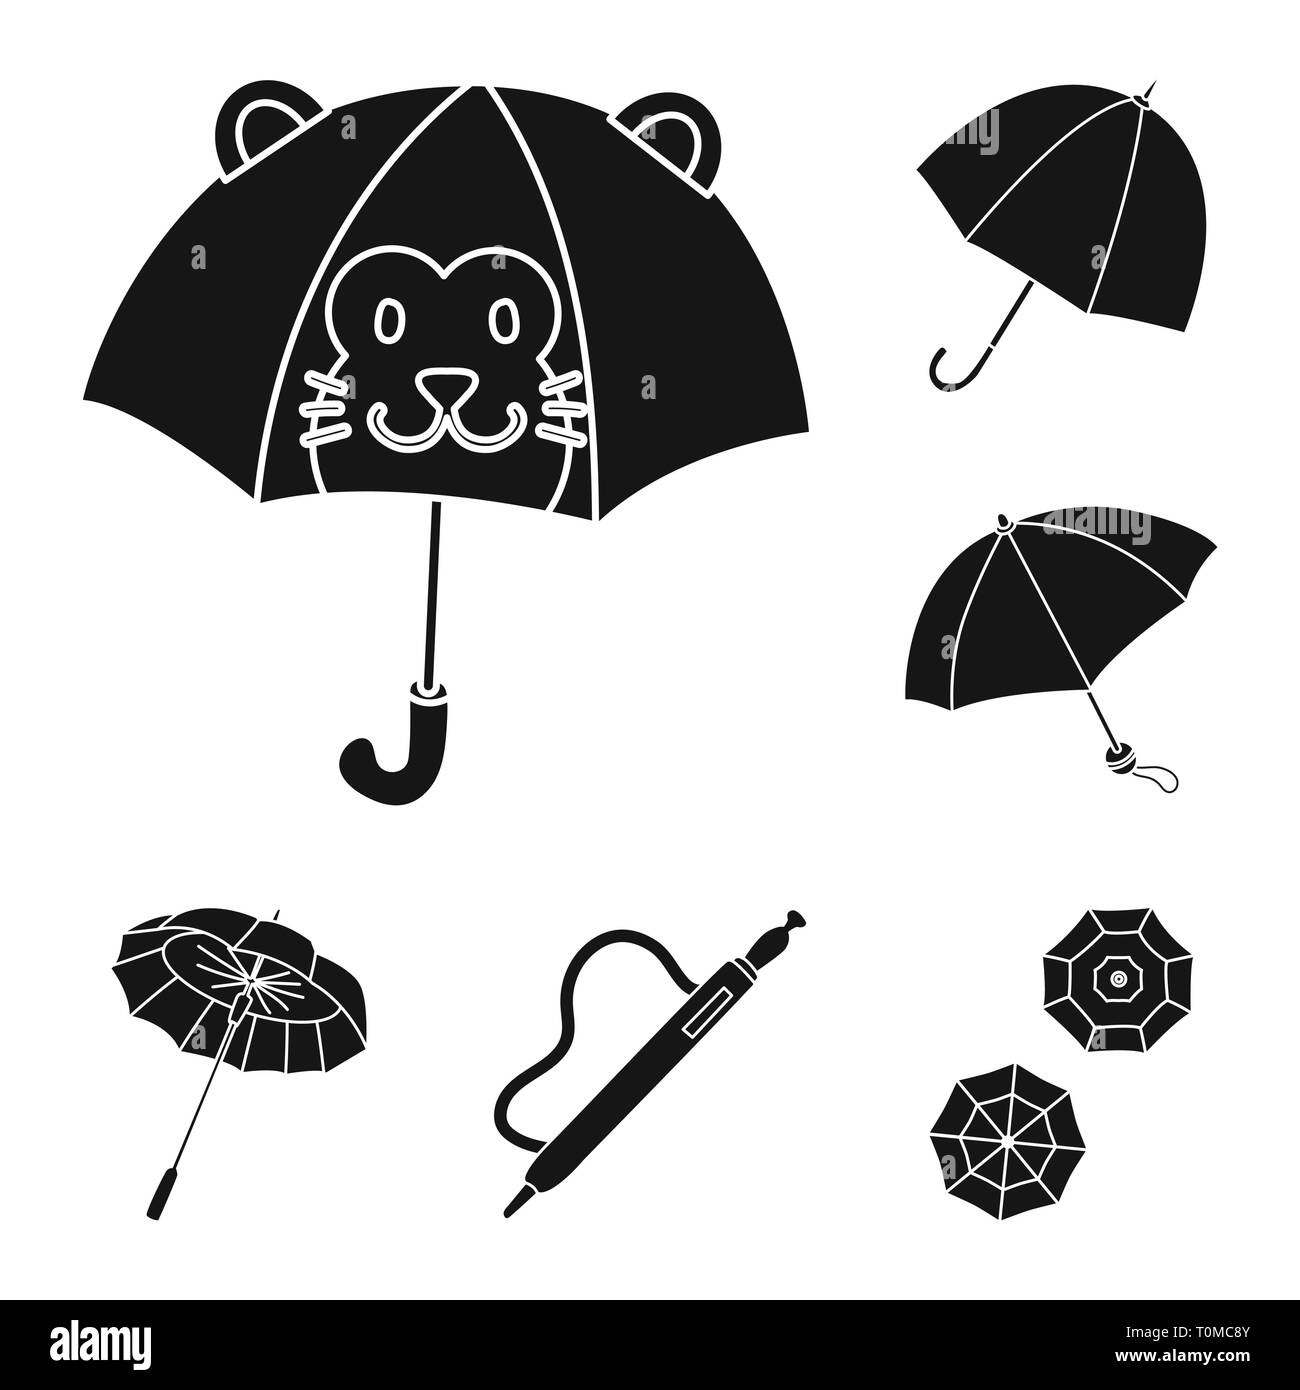 parasol,children,autumn,spring,summer,water,shadow,support,blue,monsoon,colorful,storm,meteorology,yellow,classic,climate,coverage,insurance,orange,blank,canopy,weather,rainy,umbrella,rain,season,open,protection,closed,fashion,safety,set,vector,icon  ...